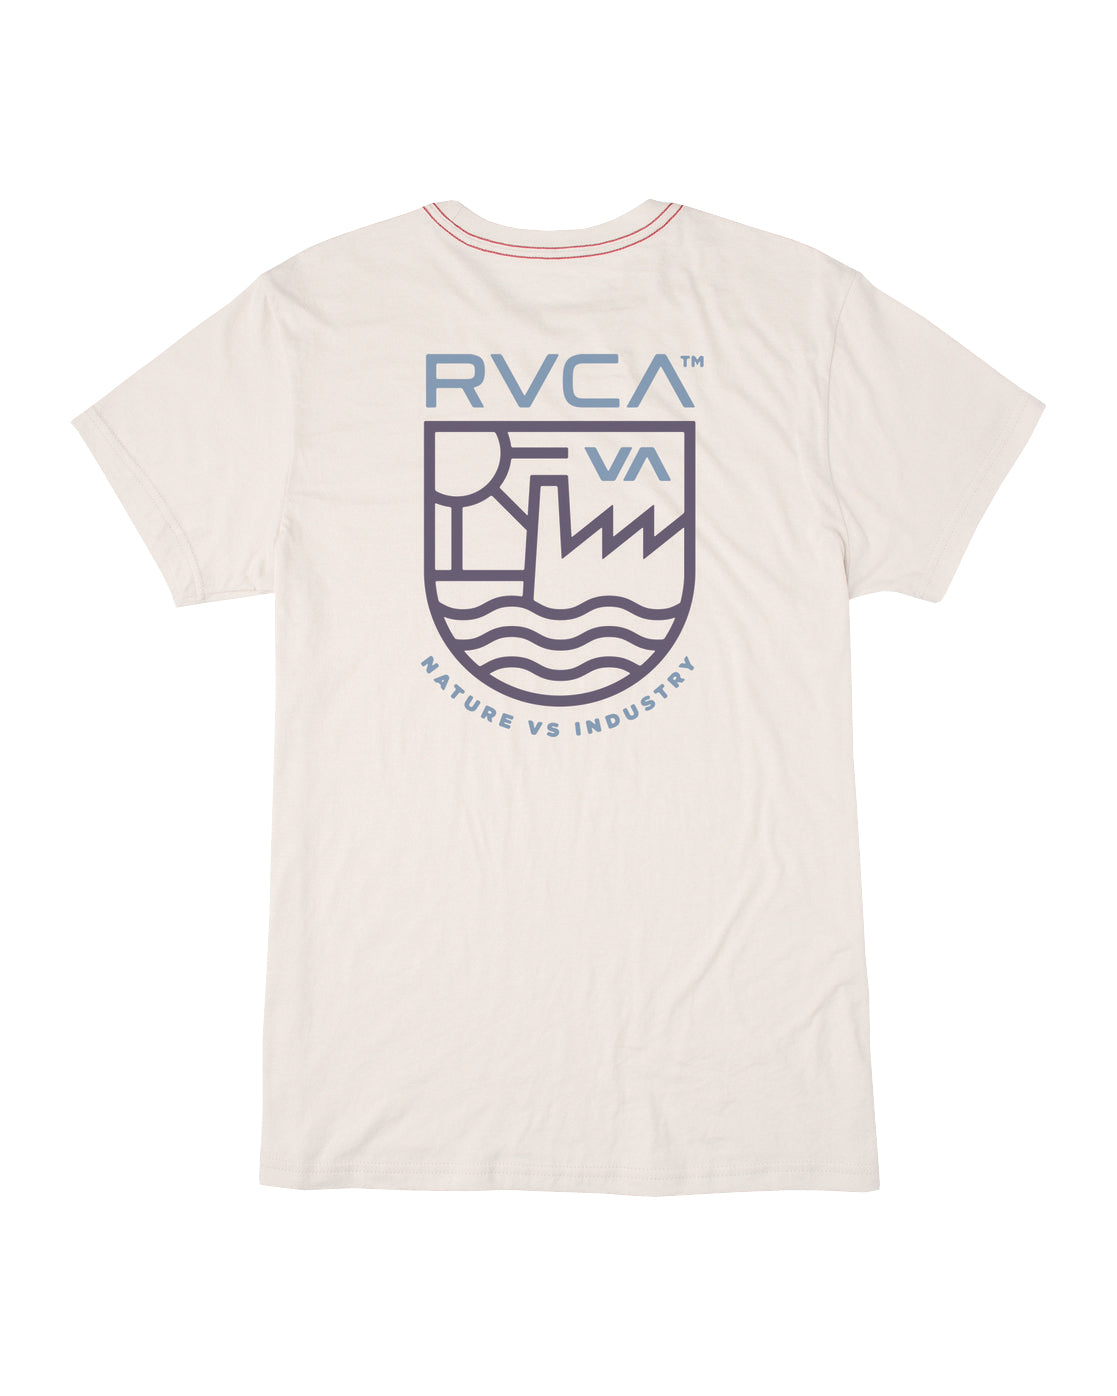 RVCA Dept of Ind SS Tee ANW S